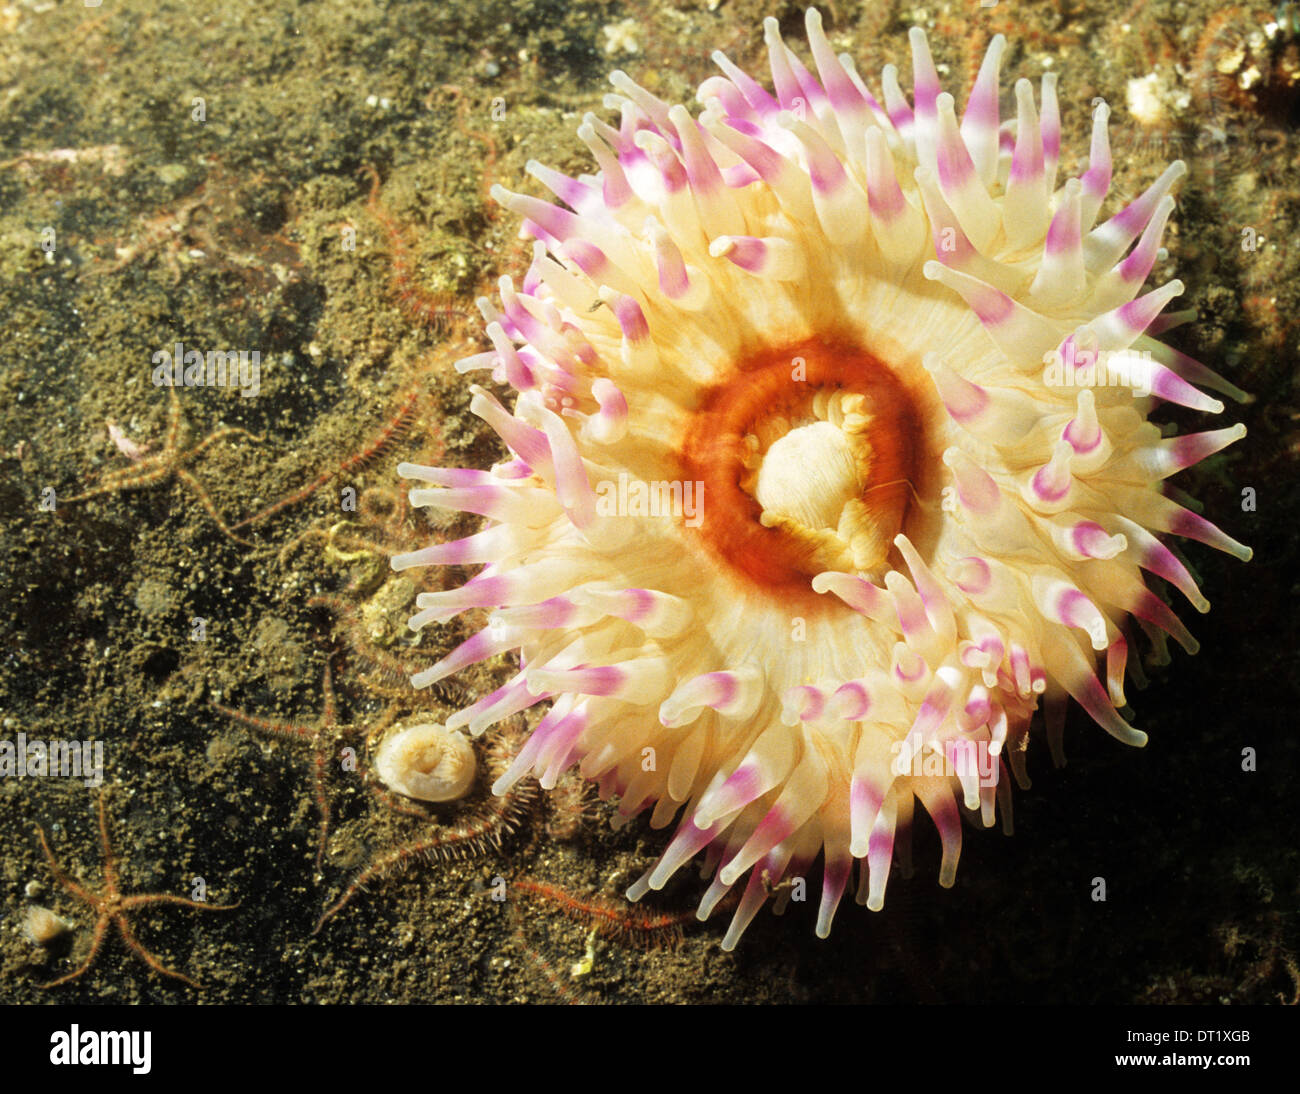 Sea Anemone. Dahlia Anemone. Urticina Felina. Part of the Cnidarians family. Found in all colours. Stock Photo